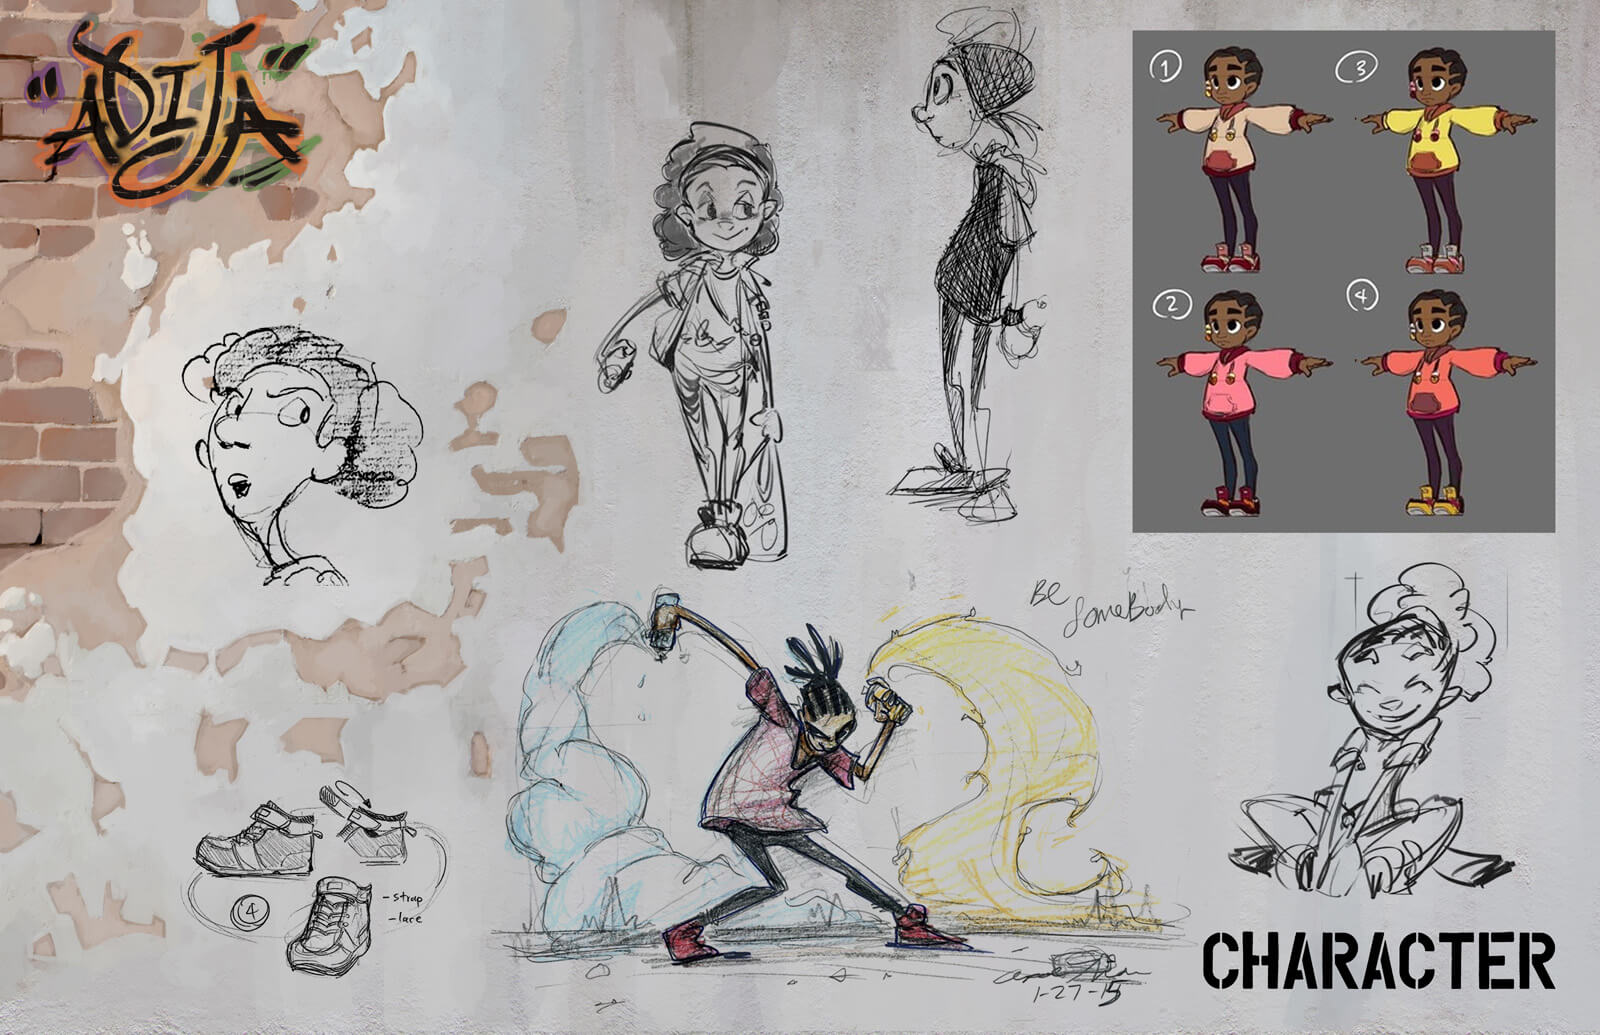 Character design sheet for the film Adija, showing several sketched versions of the young girl protagonist